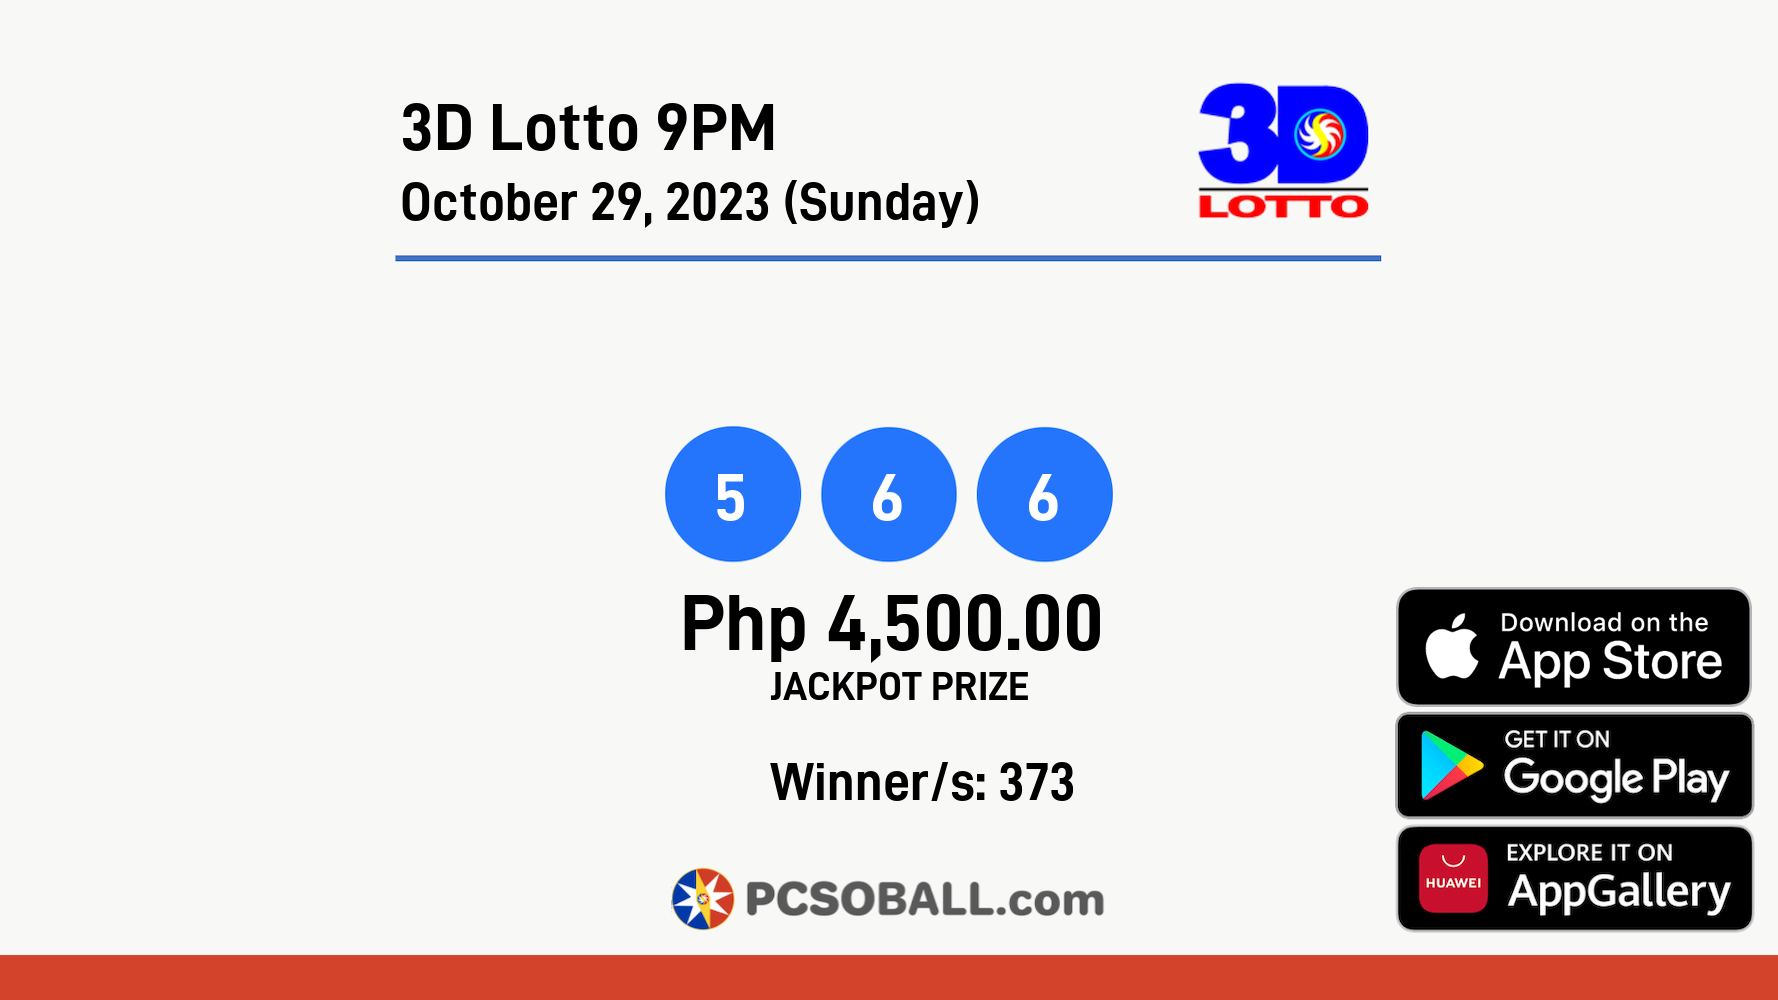 3D Lotto 9PM October 29, 2023 (Sunday) Result